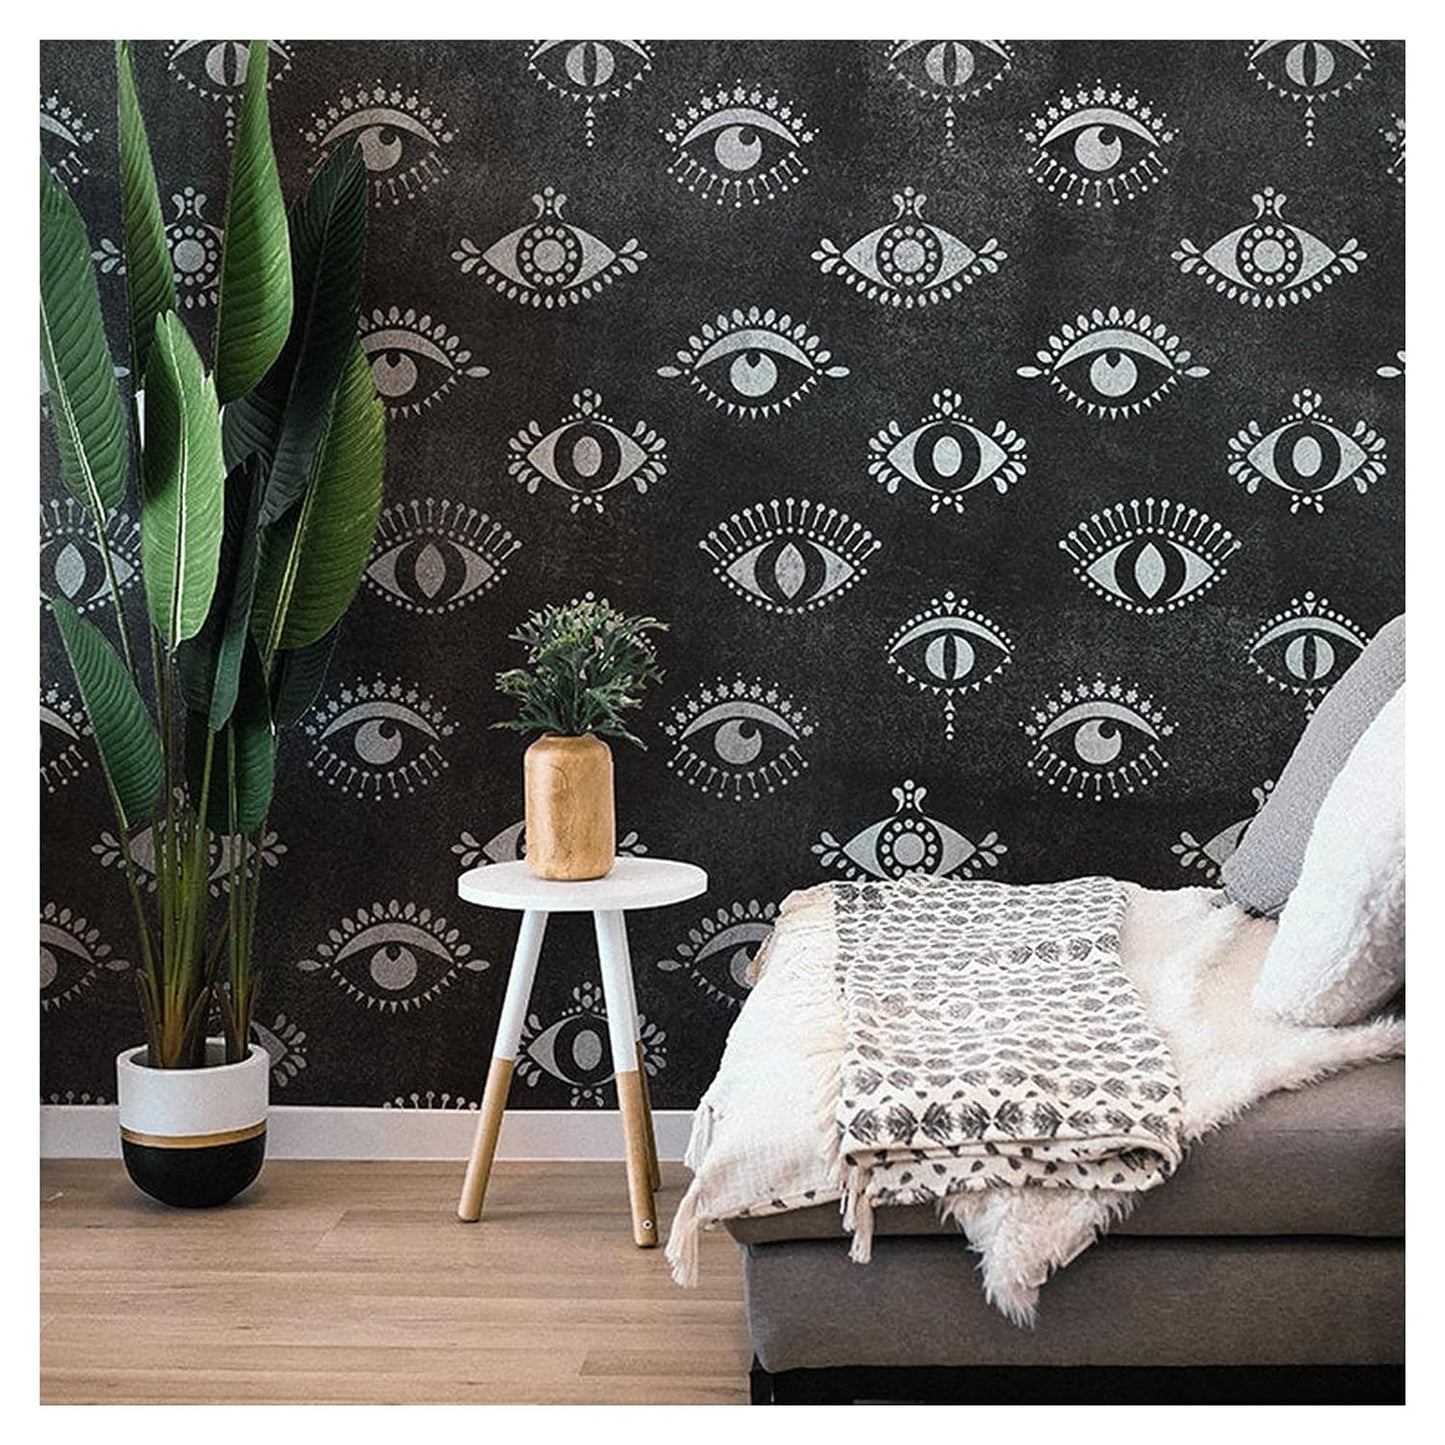 Latest Pretty Eyes Design Stencils for Wall Painting - Pack of 1, Sheet Size 24 x 36 inch/Design for Wall Painting 22 x 34 inch - Medium